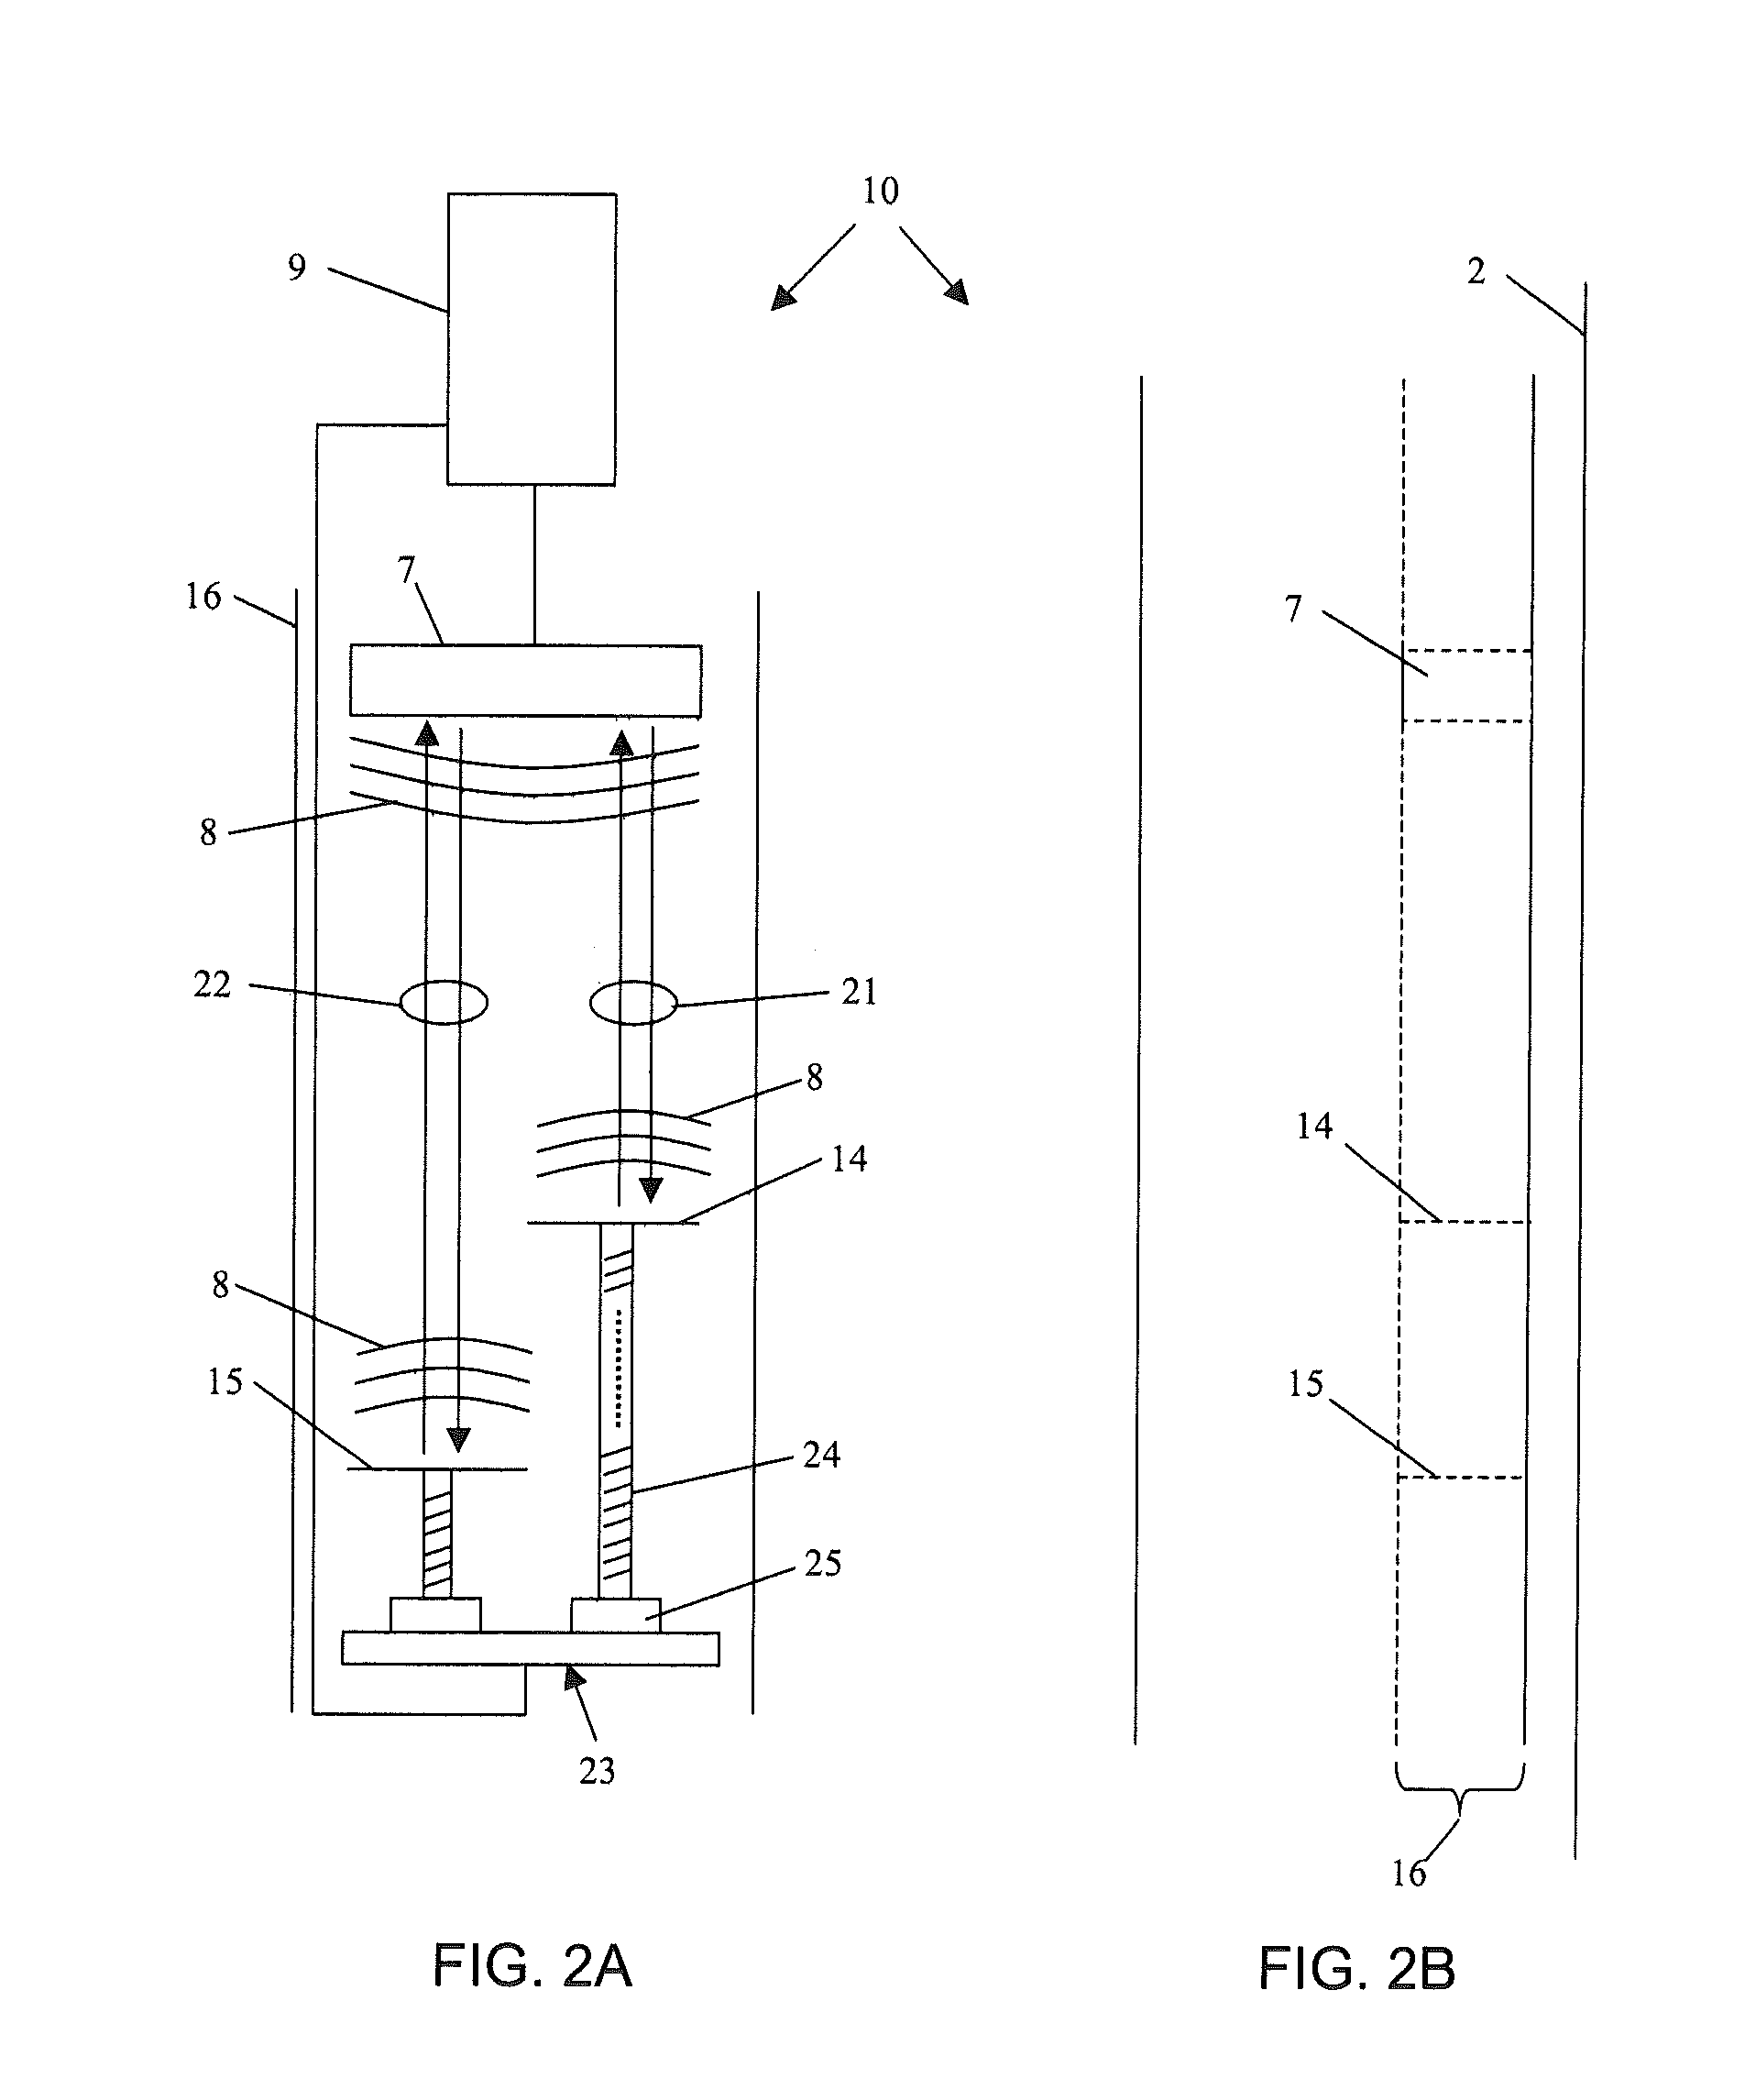 Method and apparatus for high resolution sound speed measurements